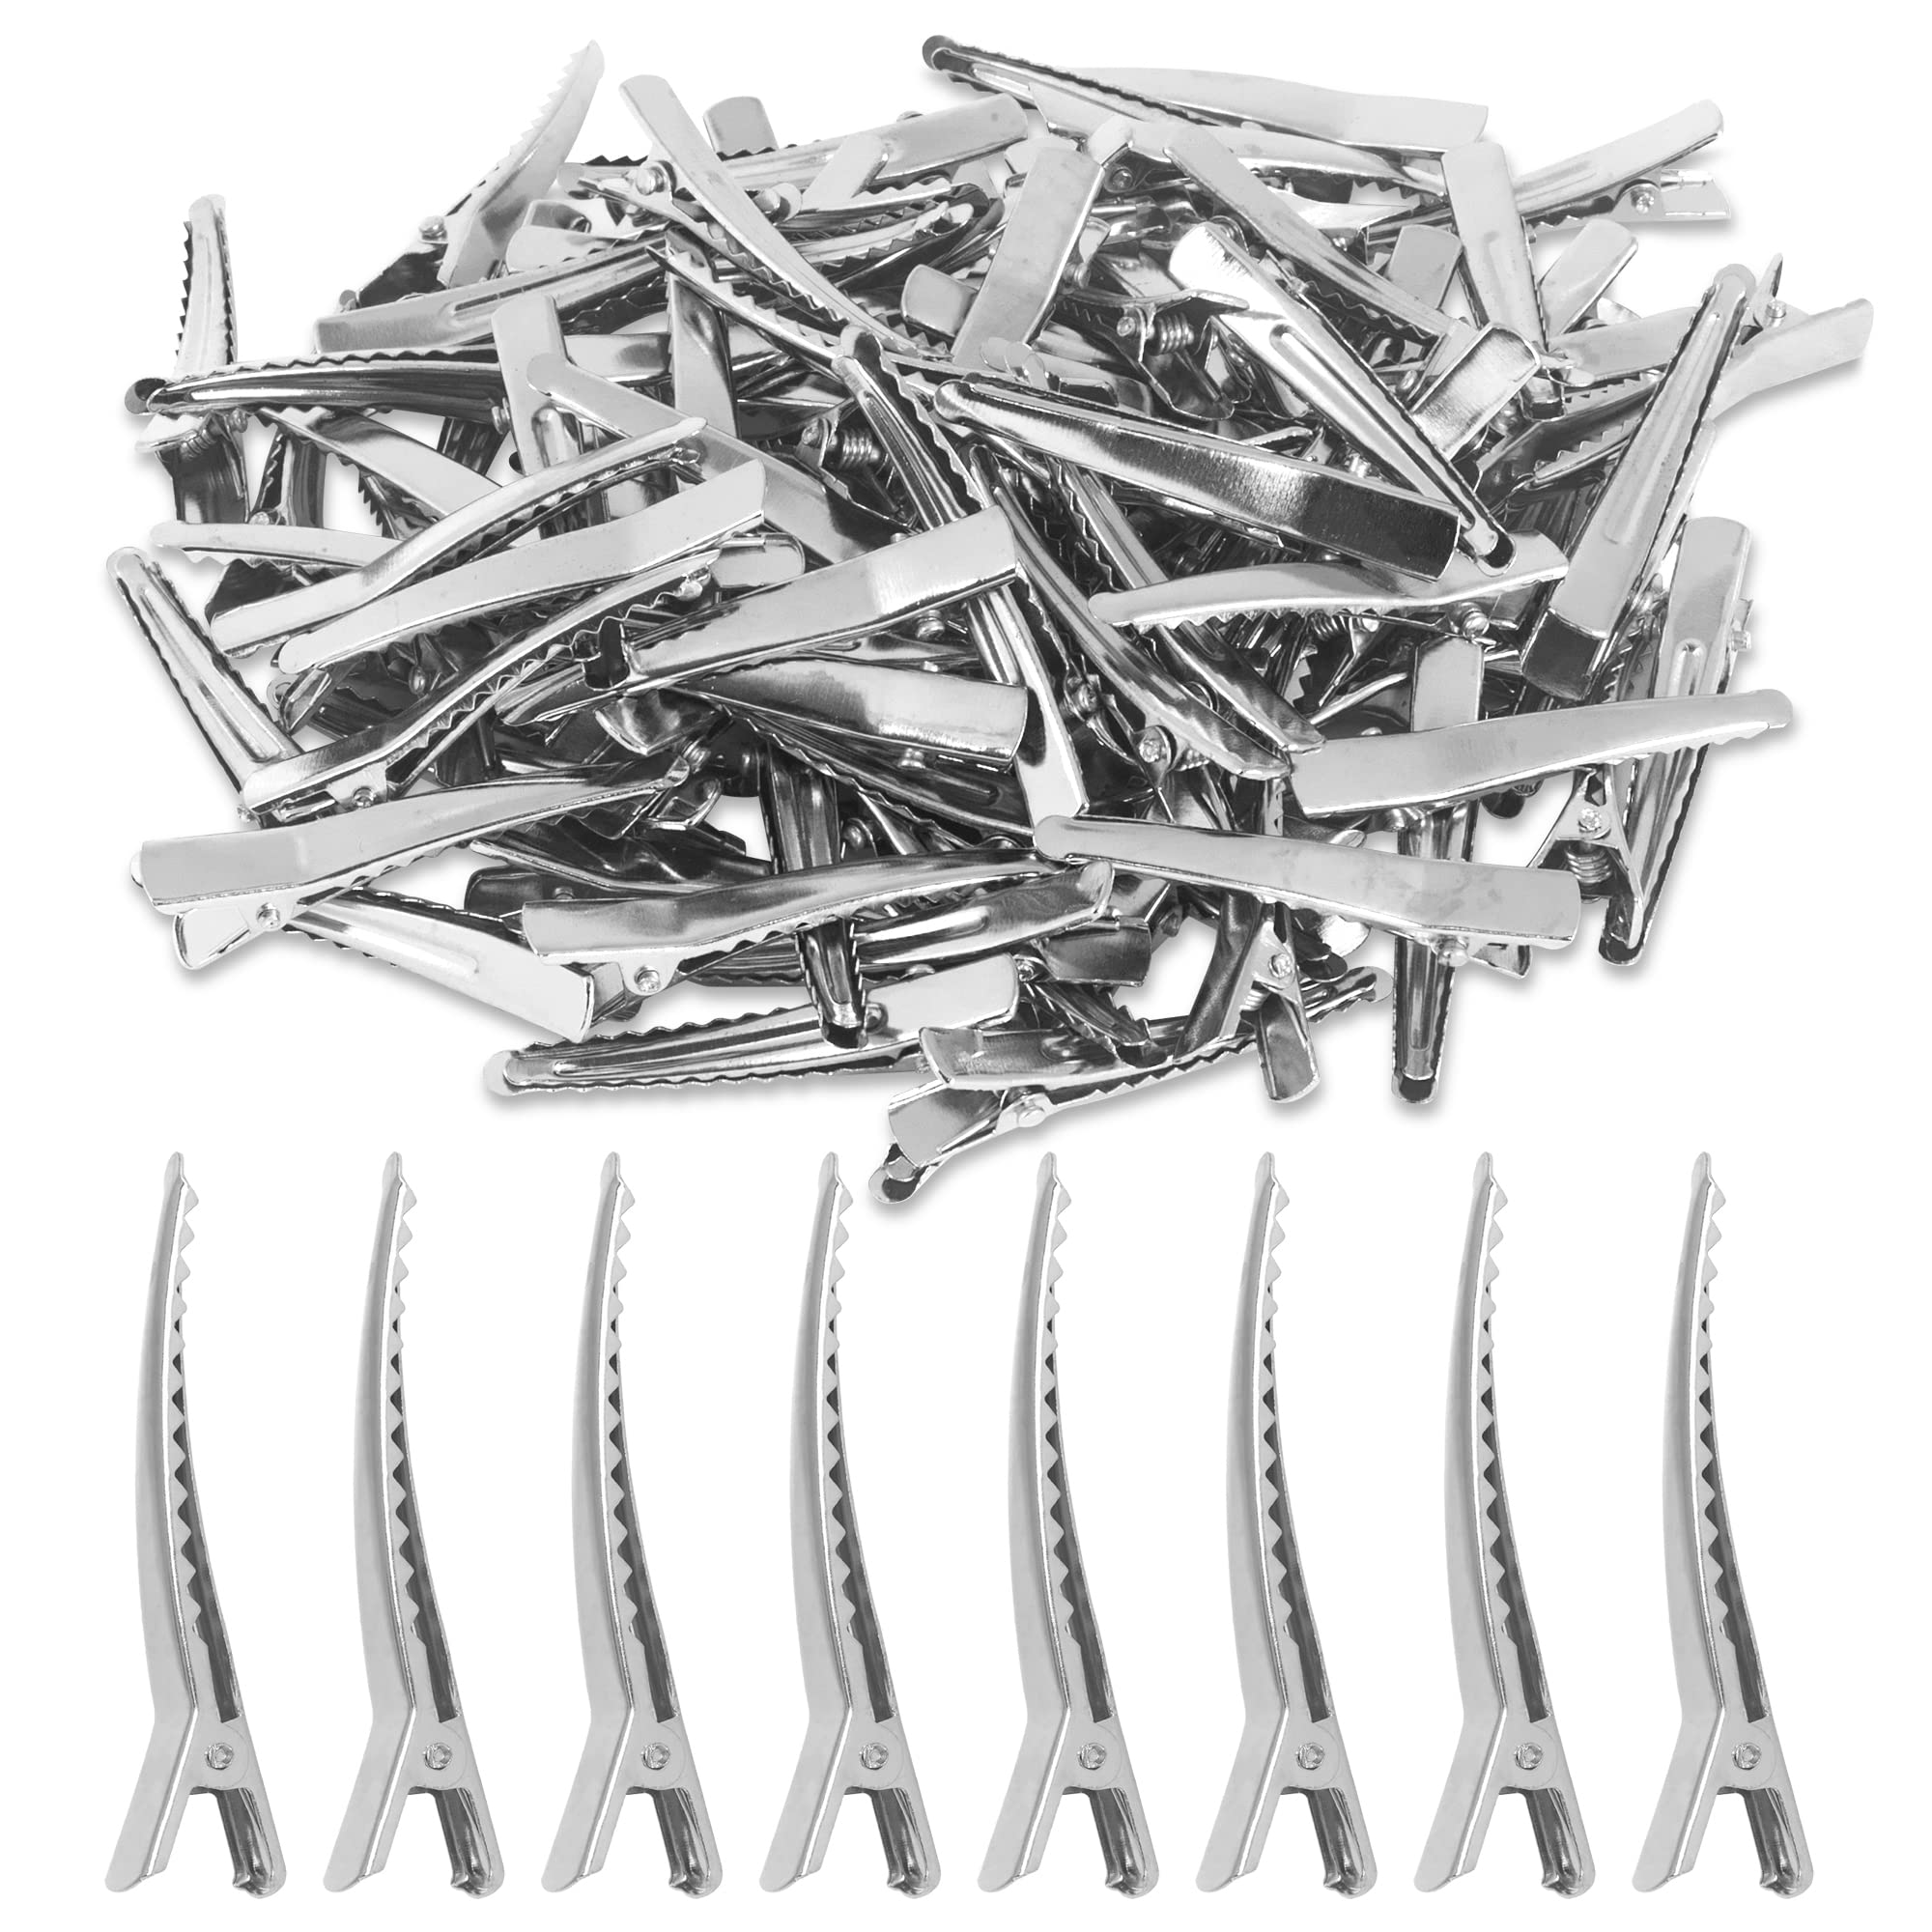 4.5cm Silver Alligator Teeth Prongs Clips Holders for Hair Care Arts &  Crafts Projects Dry Hanging Clothing Office Paper Document Organization  (100 Pieces)